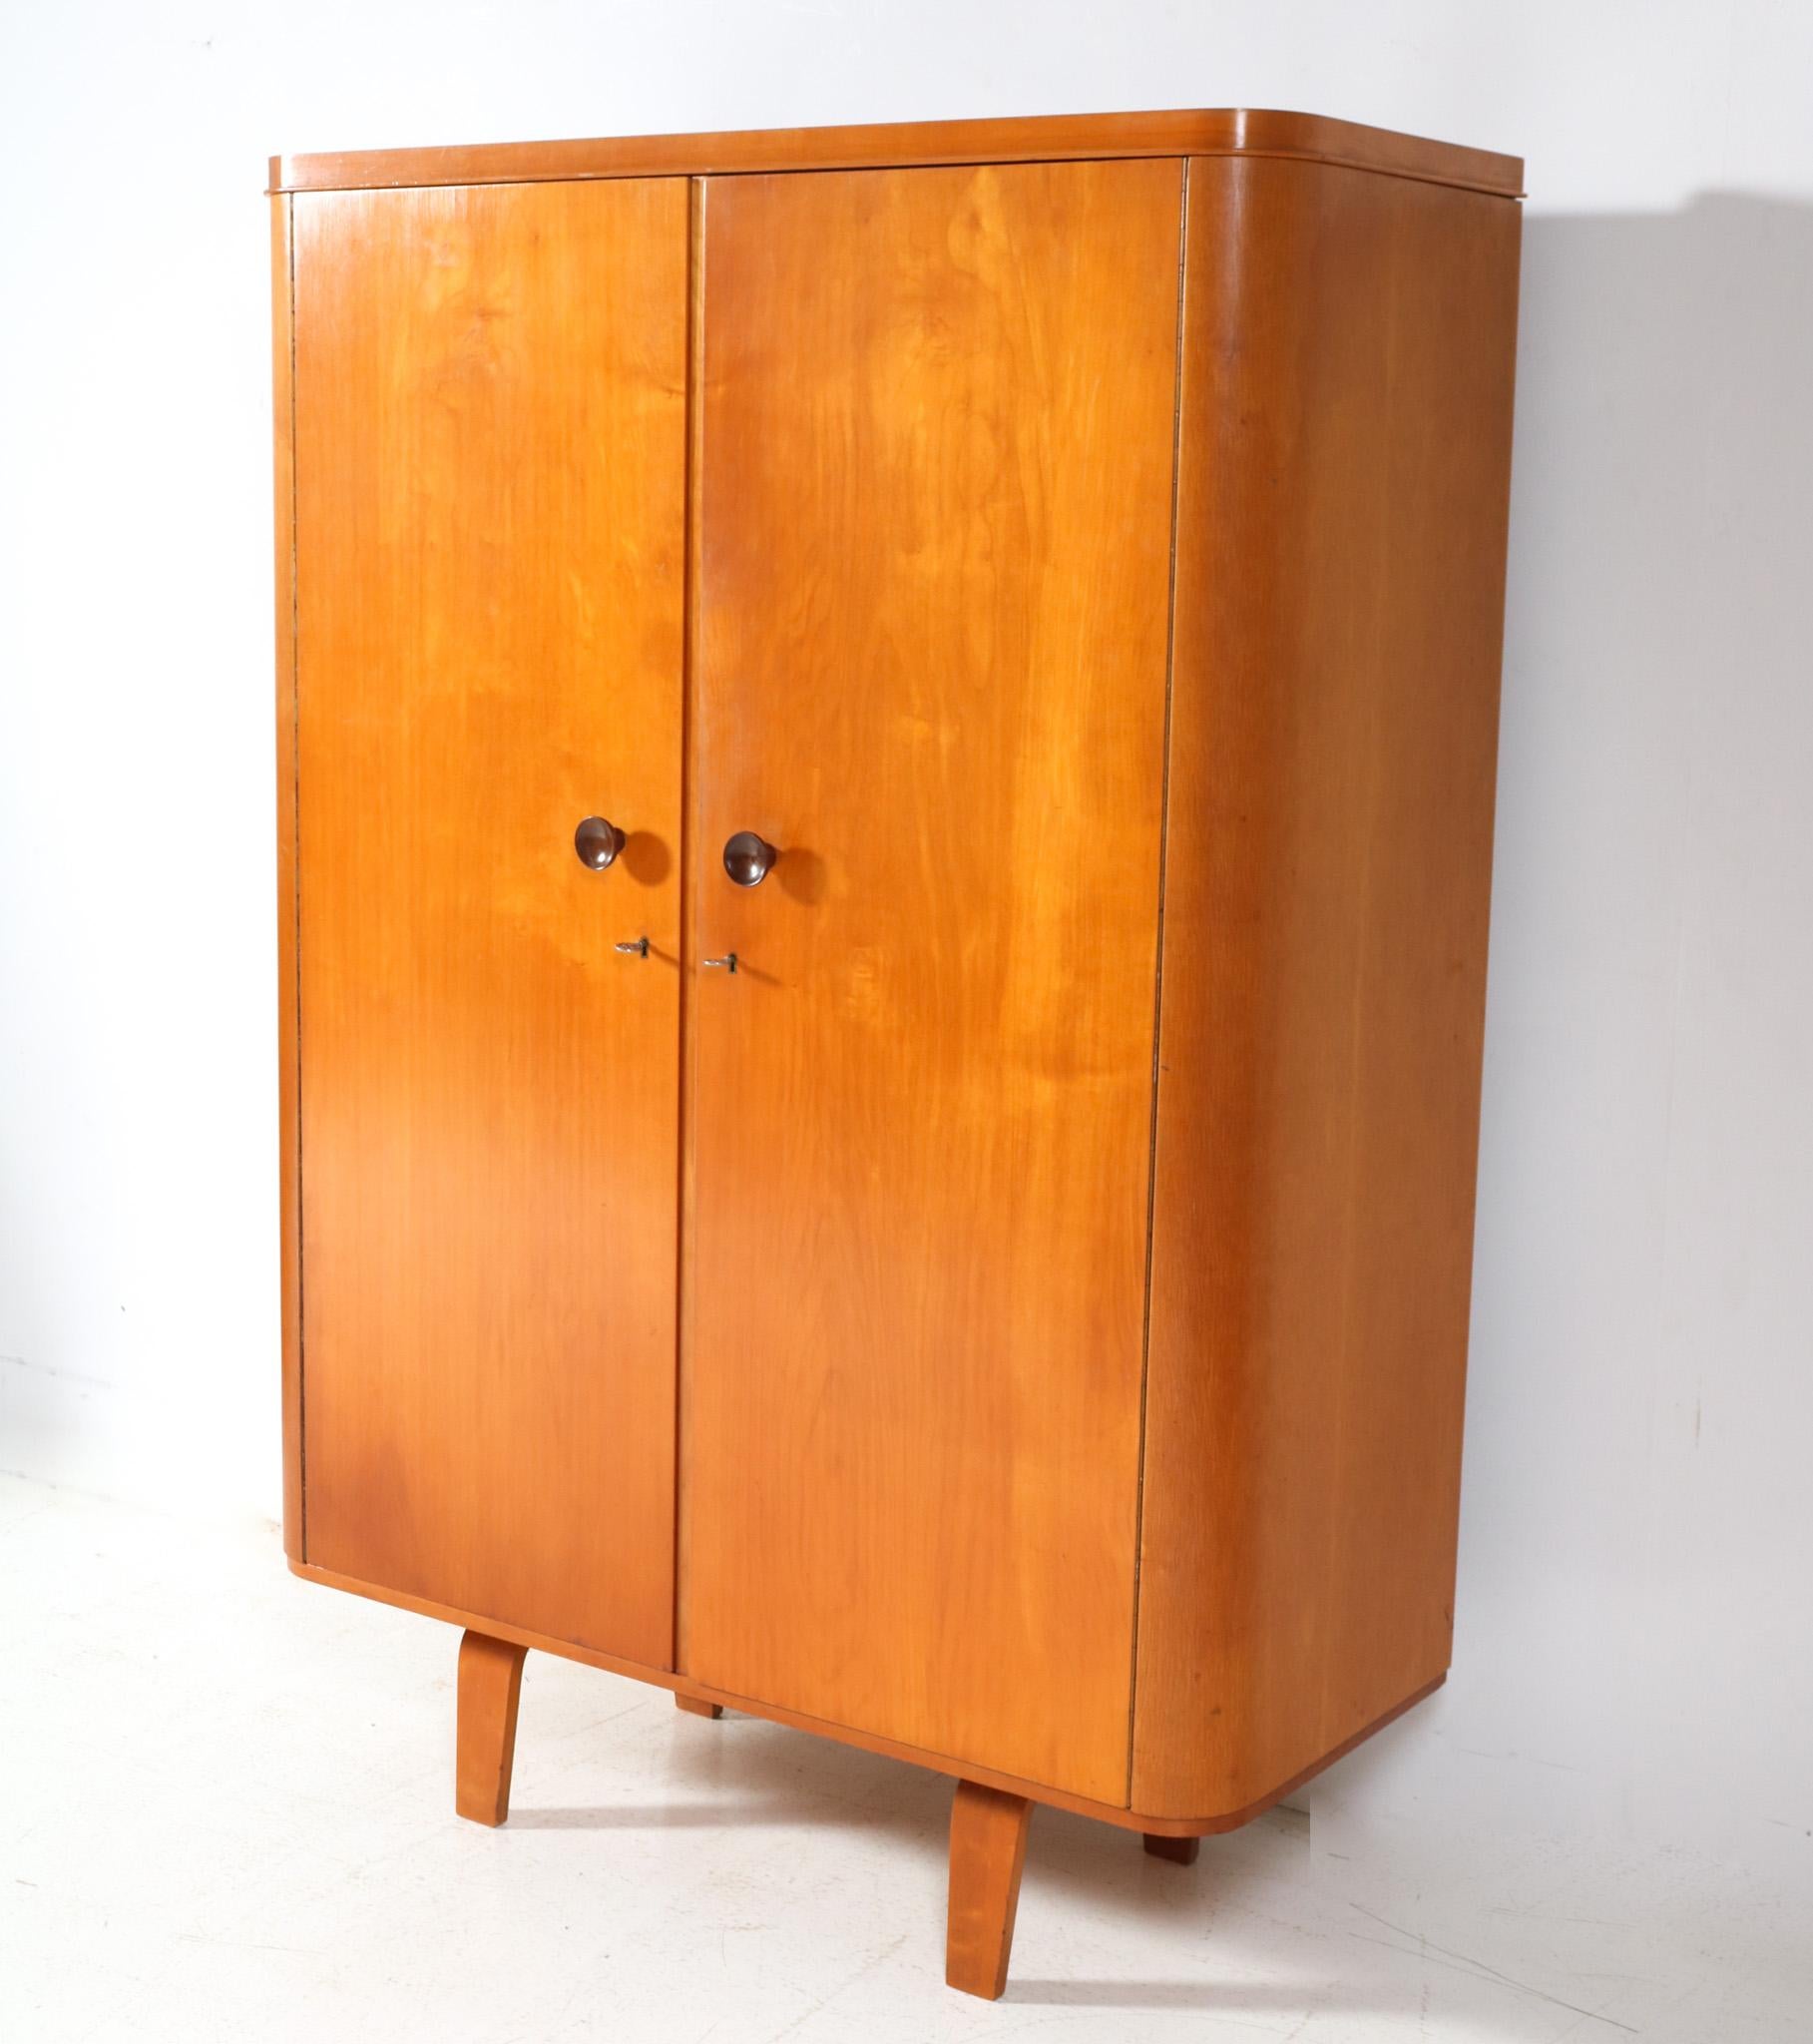 Dutch  Mid-Century Modern Armoire by Cor Alons for Den Boer Gouda, 1949 For Sale